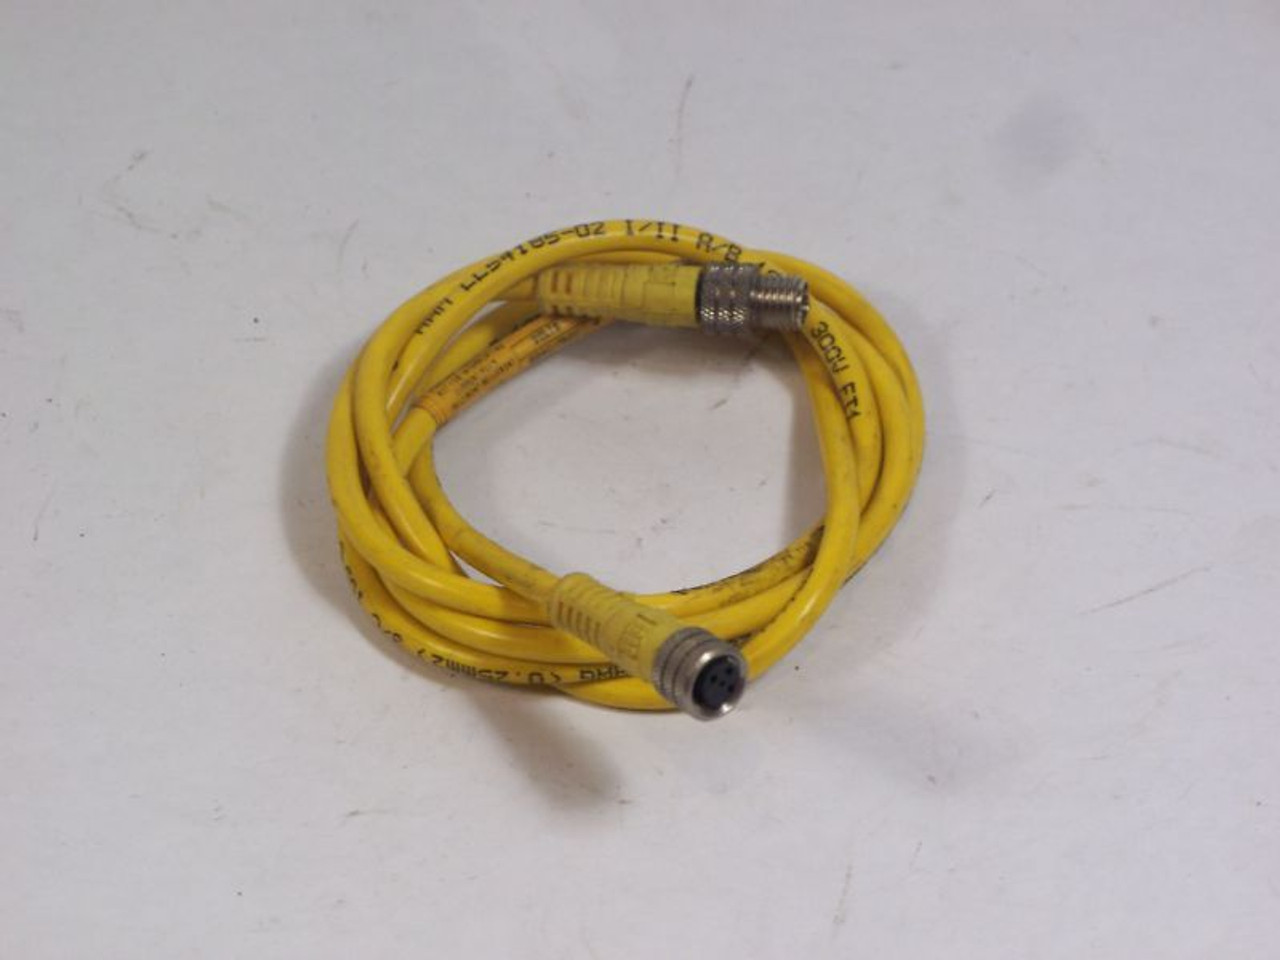 WOODHEAD 443030A10M010 CONNECTOR CABLE 3 PIN USED